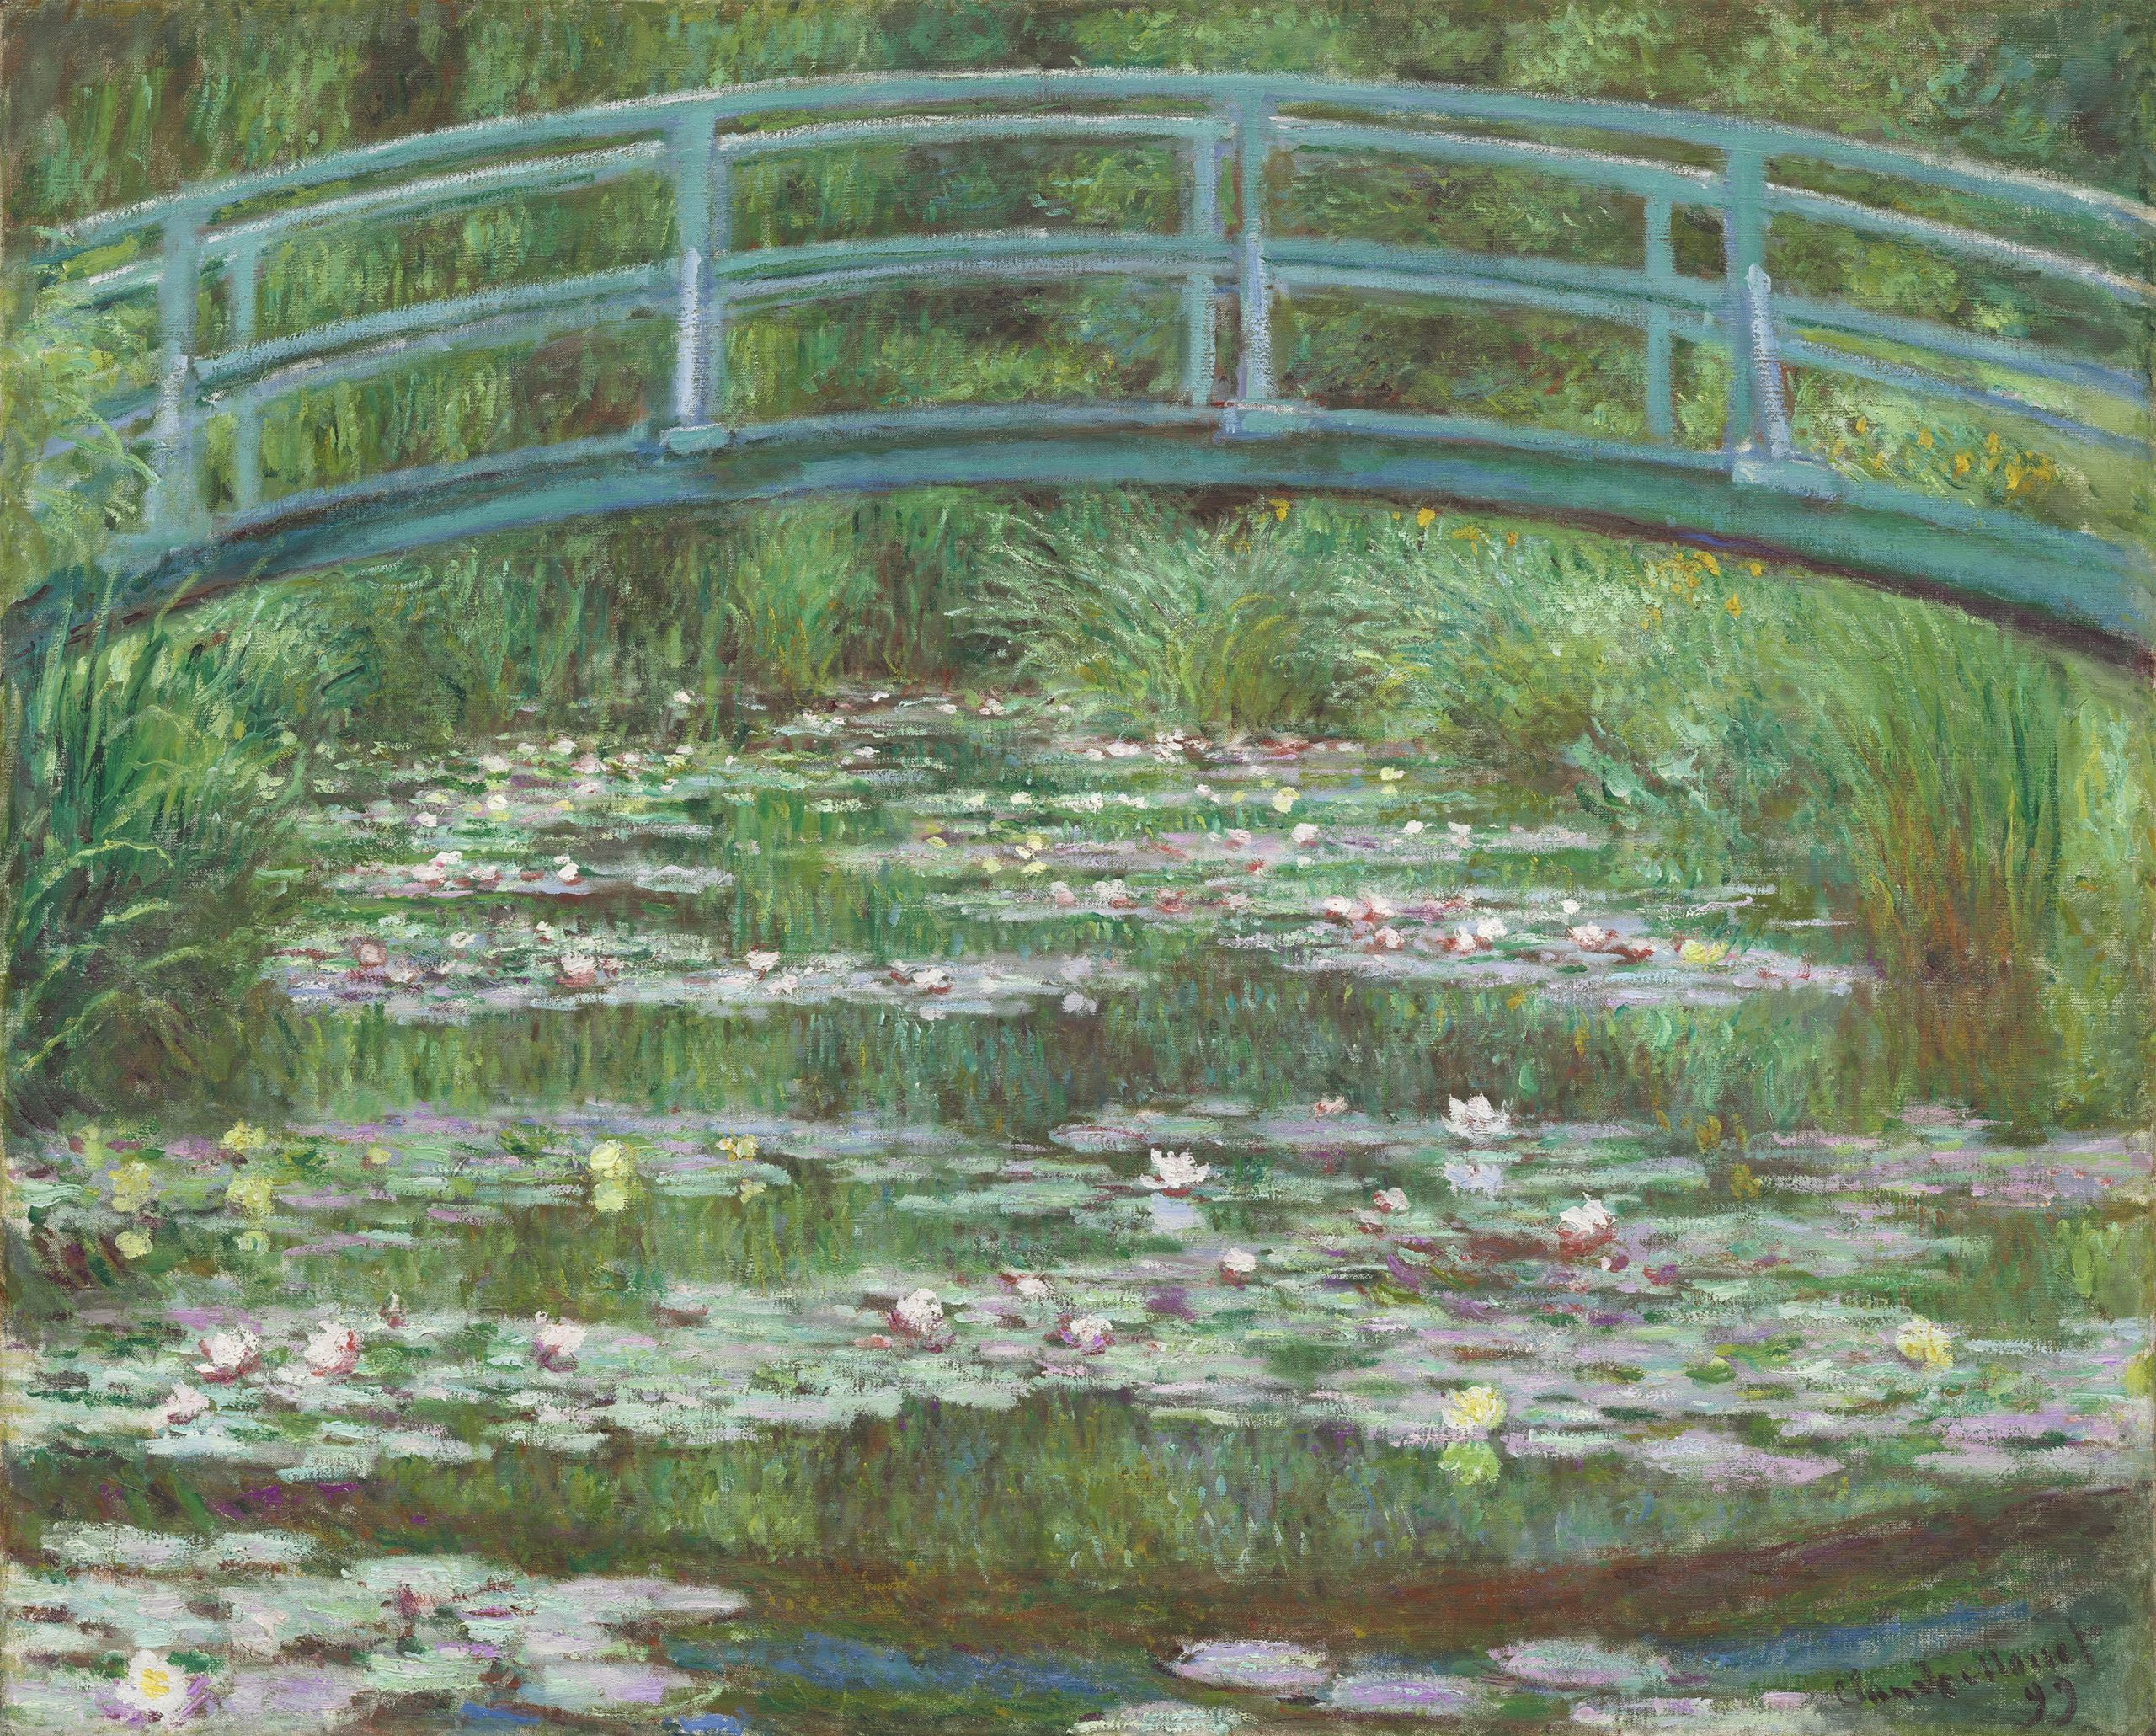 Claude Monet, The Japanese Footbridge, oil on canvas, 1899 (National Gallery of Art, Washington D.C.). Photo by Gandalf's Gallery, CC BY-NC-SA 2.0.